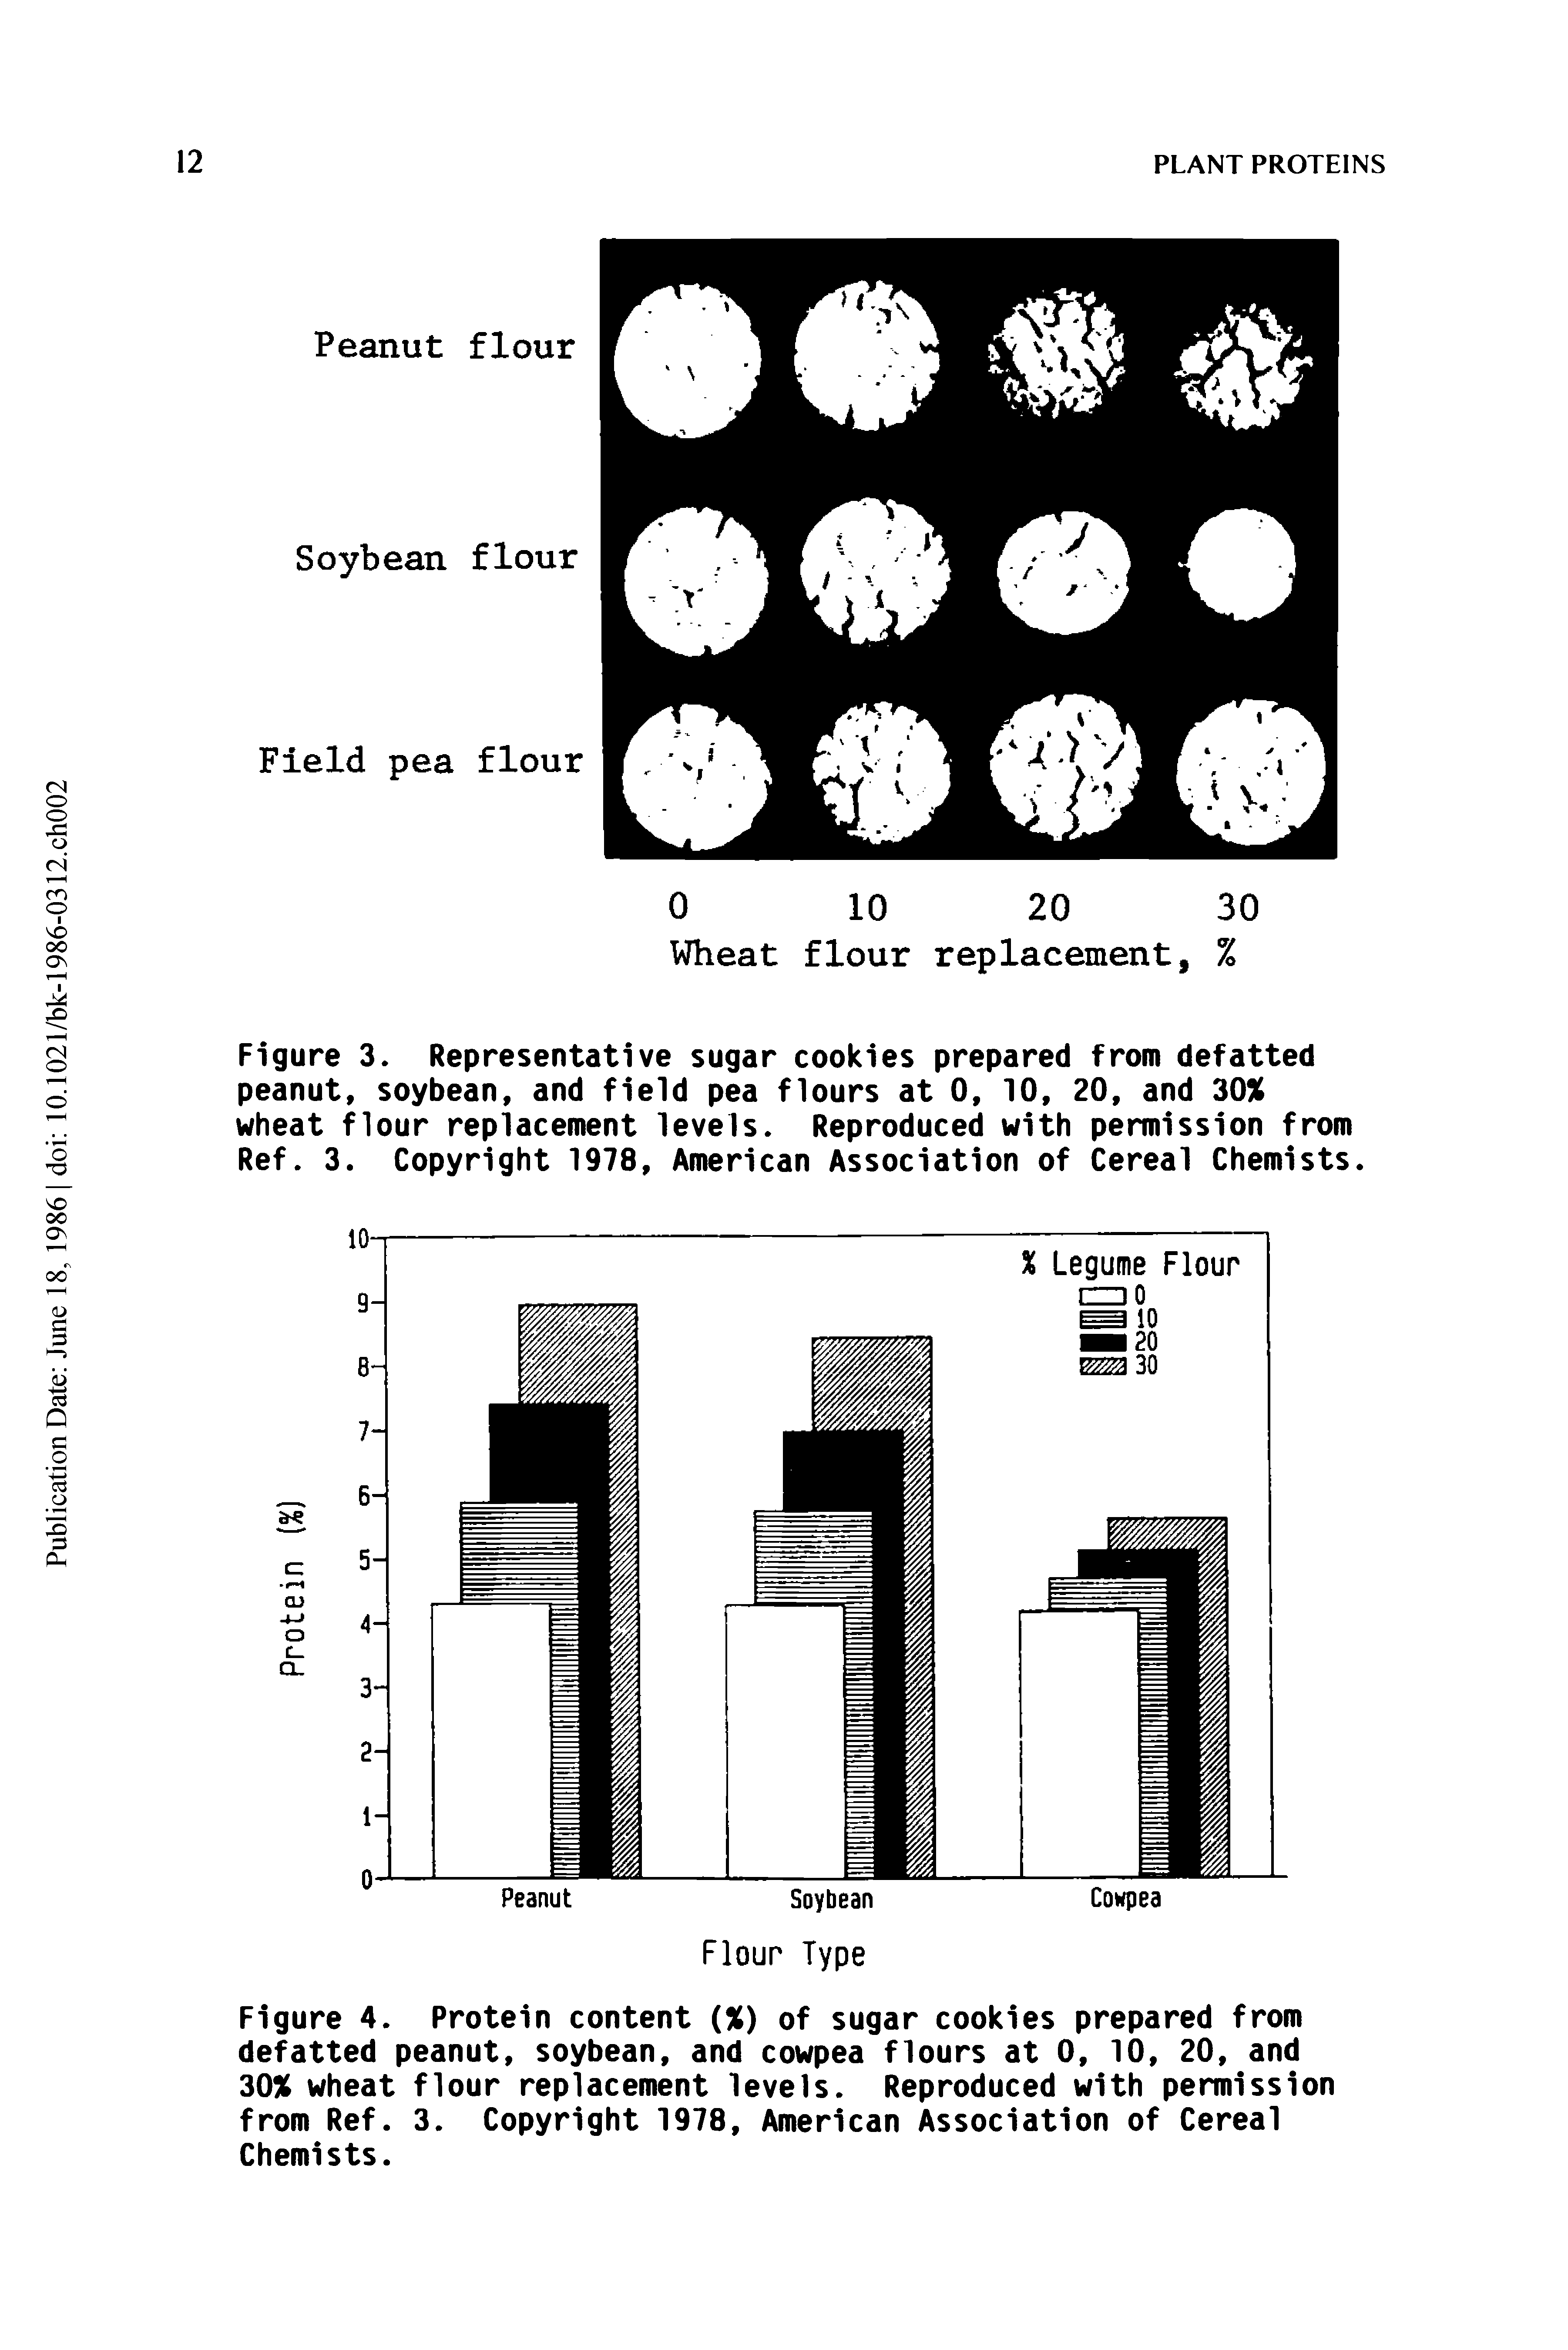 Figure 3. Representative sugar cookies prepared from defatted peanut, soybean, and field pea flours at 0, 10, 20, and 30% wheat flour replacement levels. Reproduced with permission from Ref. 3. Copyright 1978, American Association of Cereal Chemists.